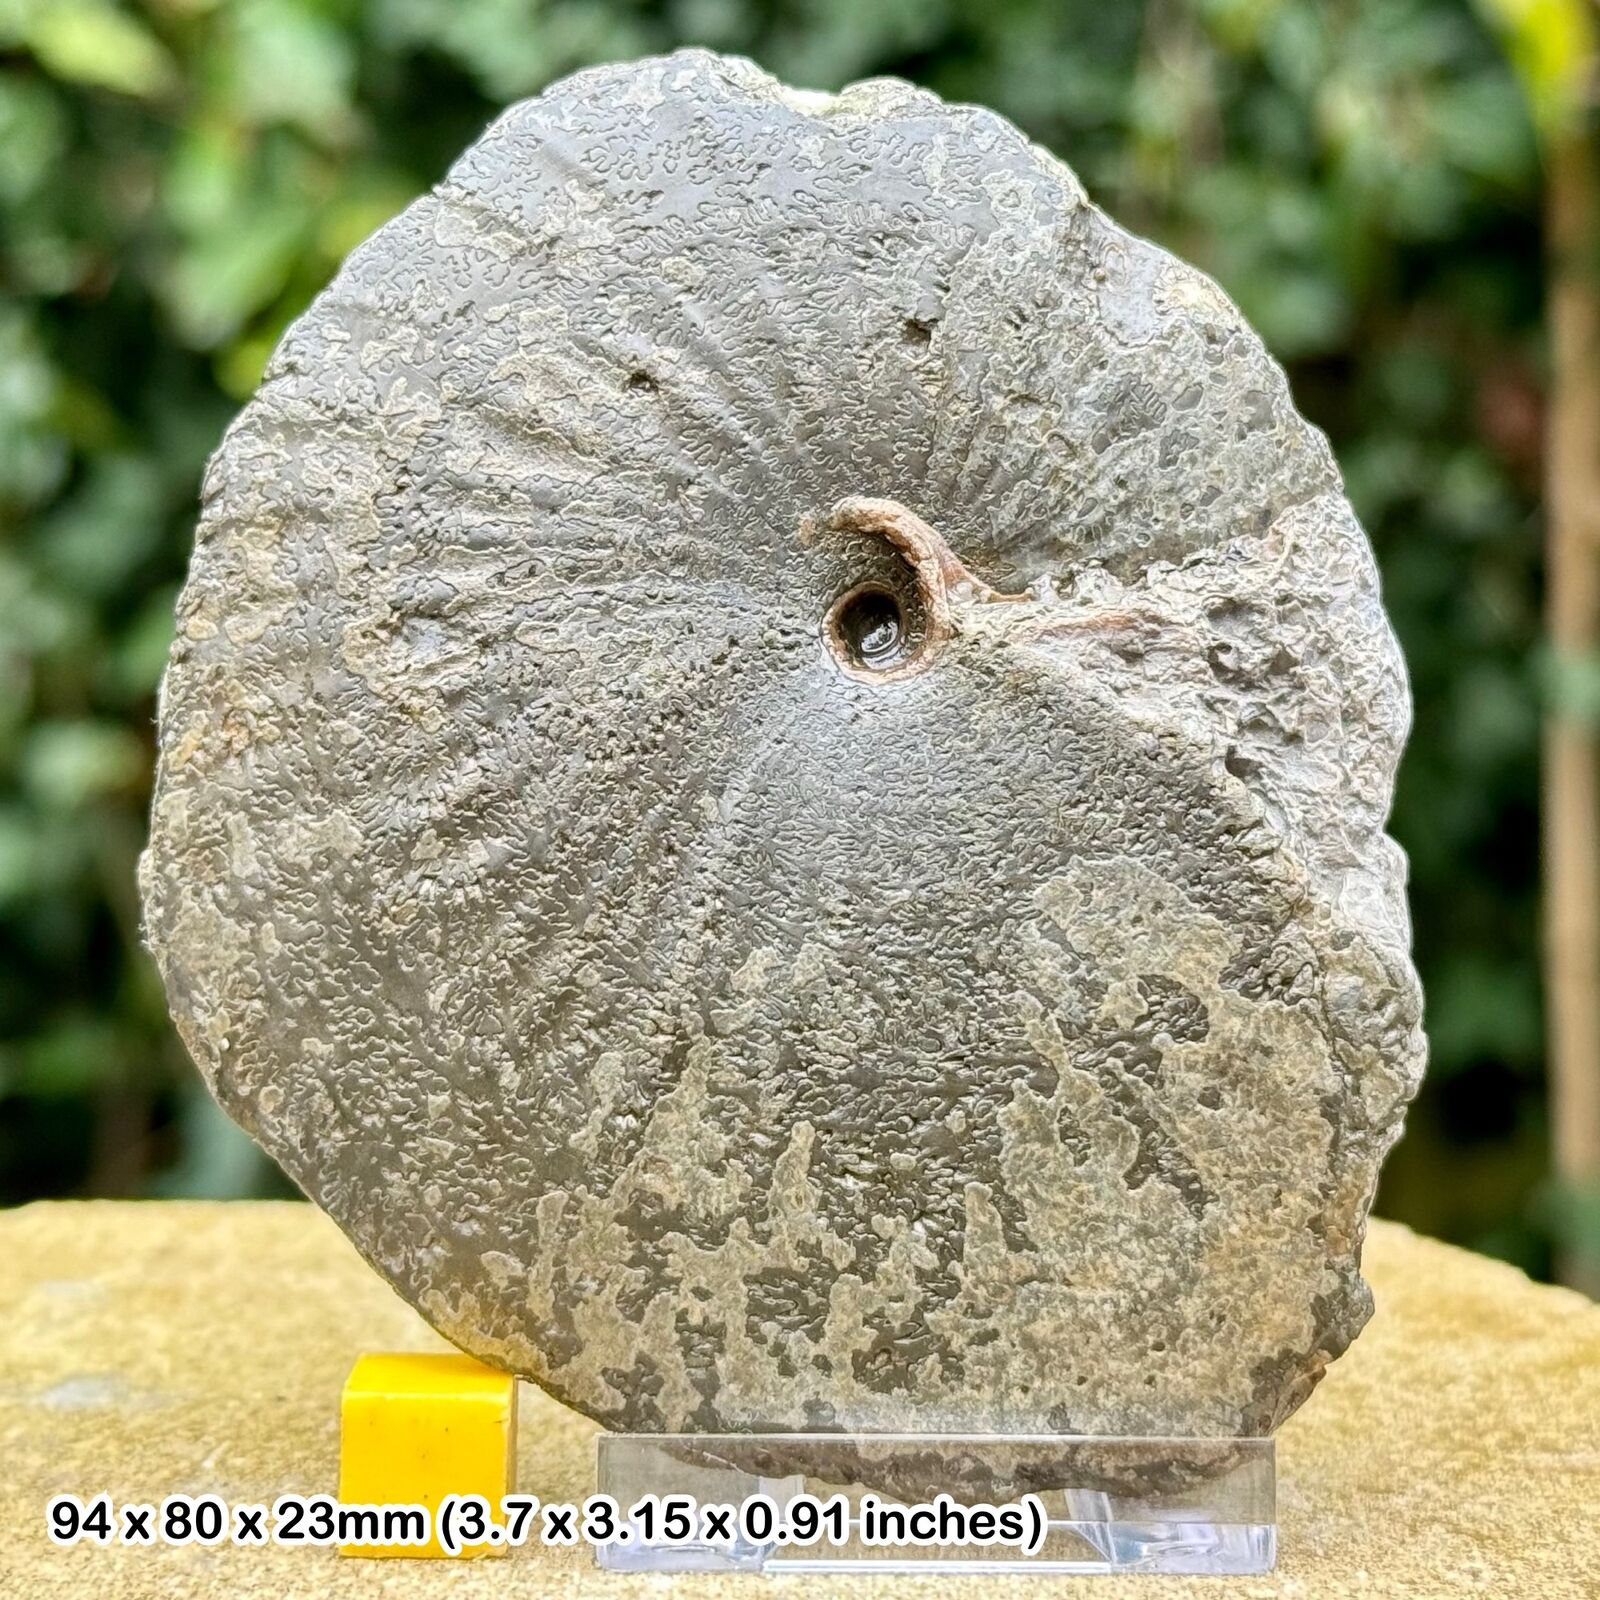 Exquisite Large Oxynoticeras Pyrite Ammonite Fossil on Stand - Certified,